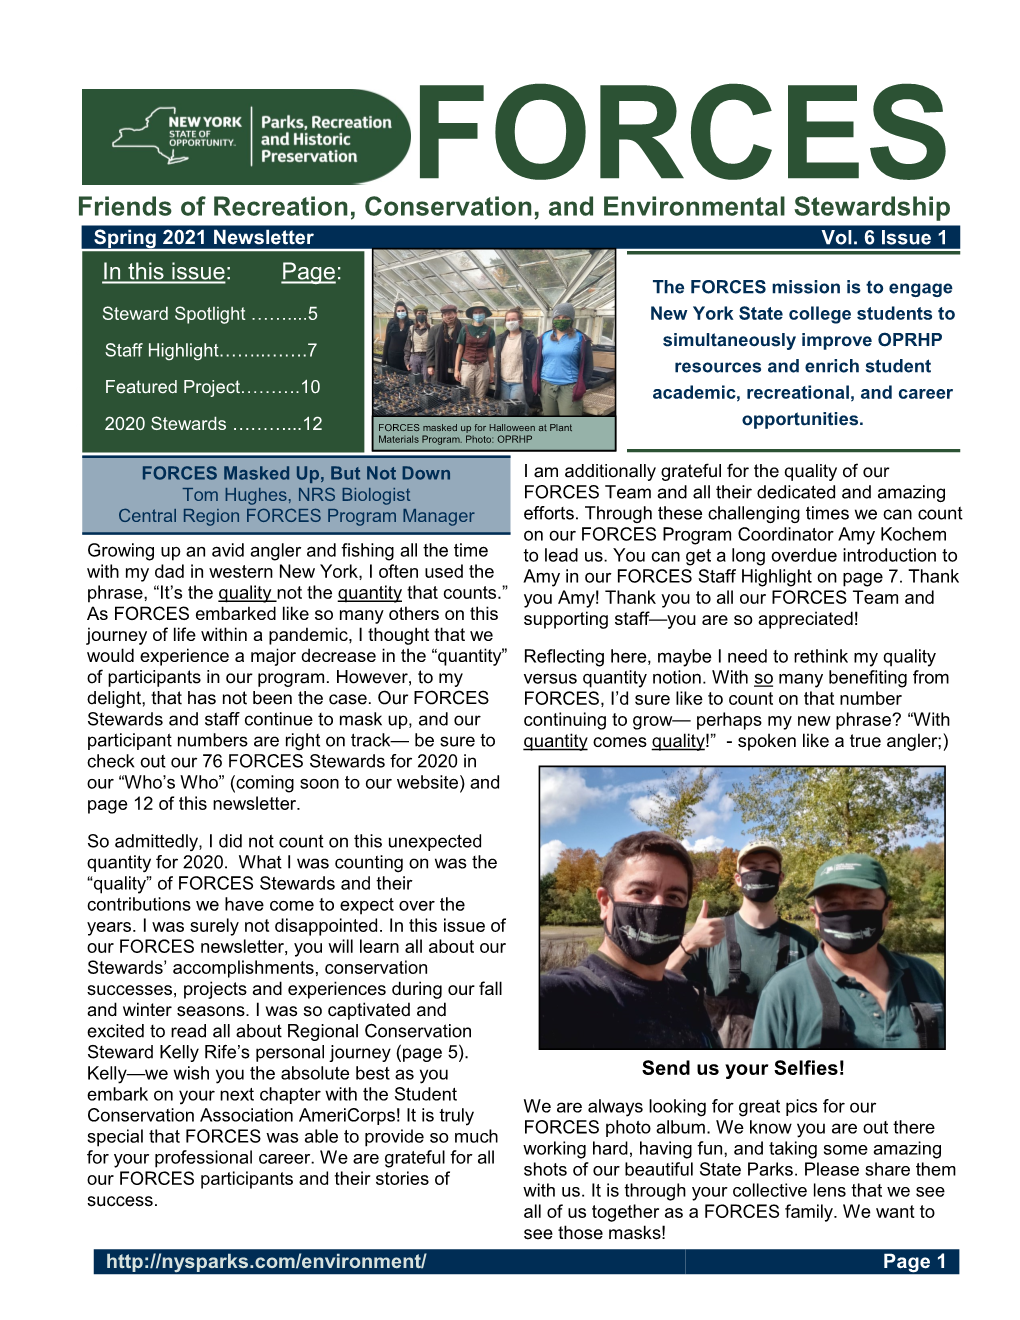 FORCES Friends of Recreation, Conservation, and Environmental Stewardship